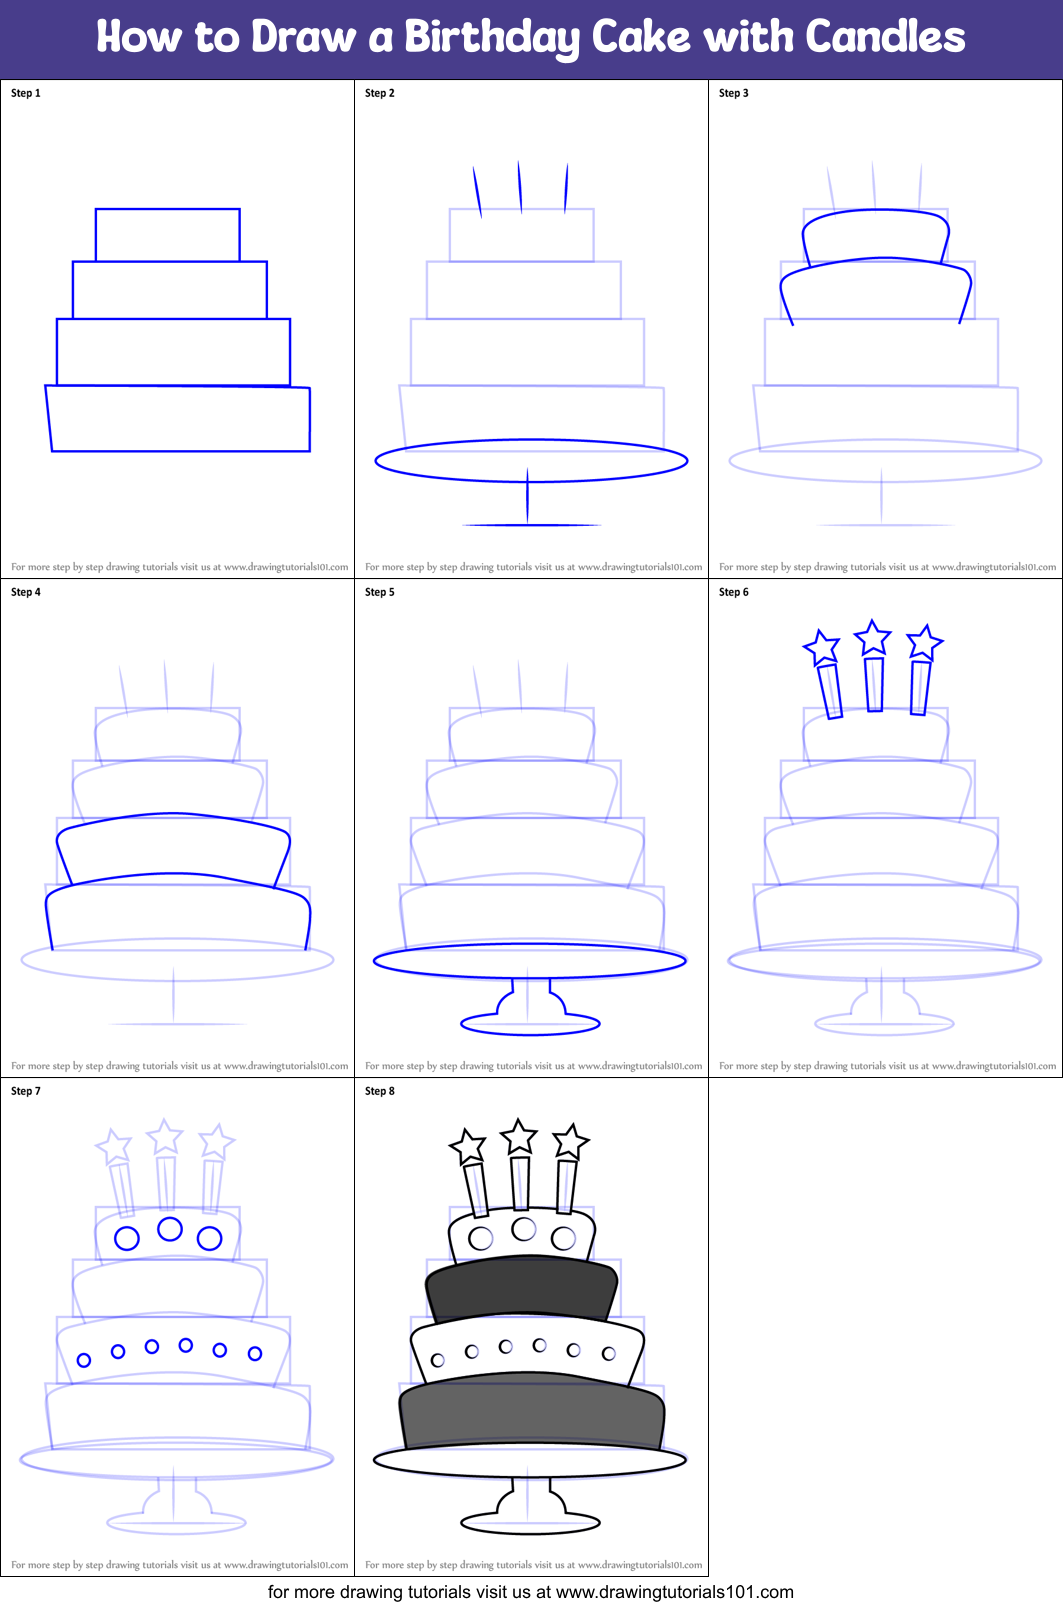 Download How to Draw a Birthday Cake with Candles printable step by step drawing sheet ...